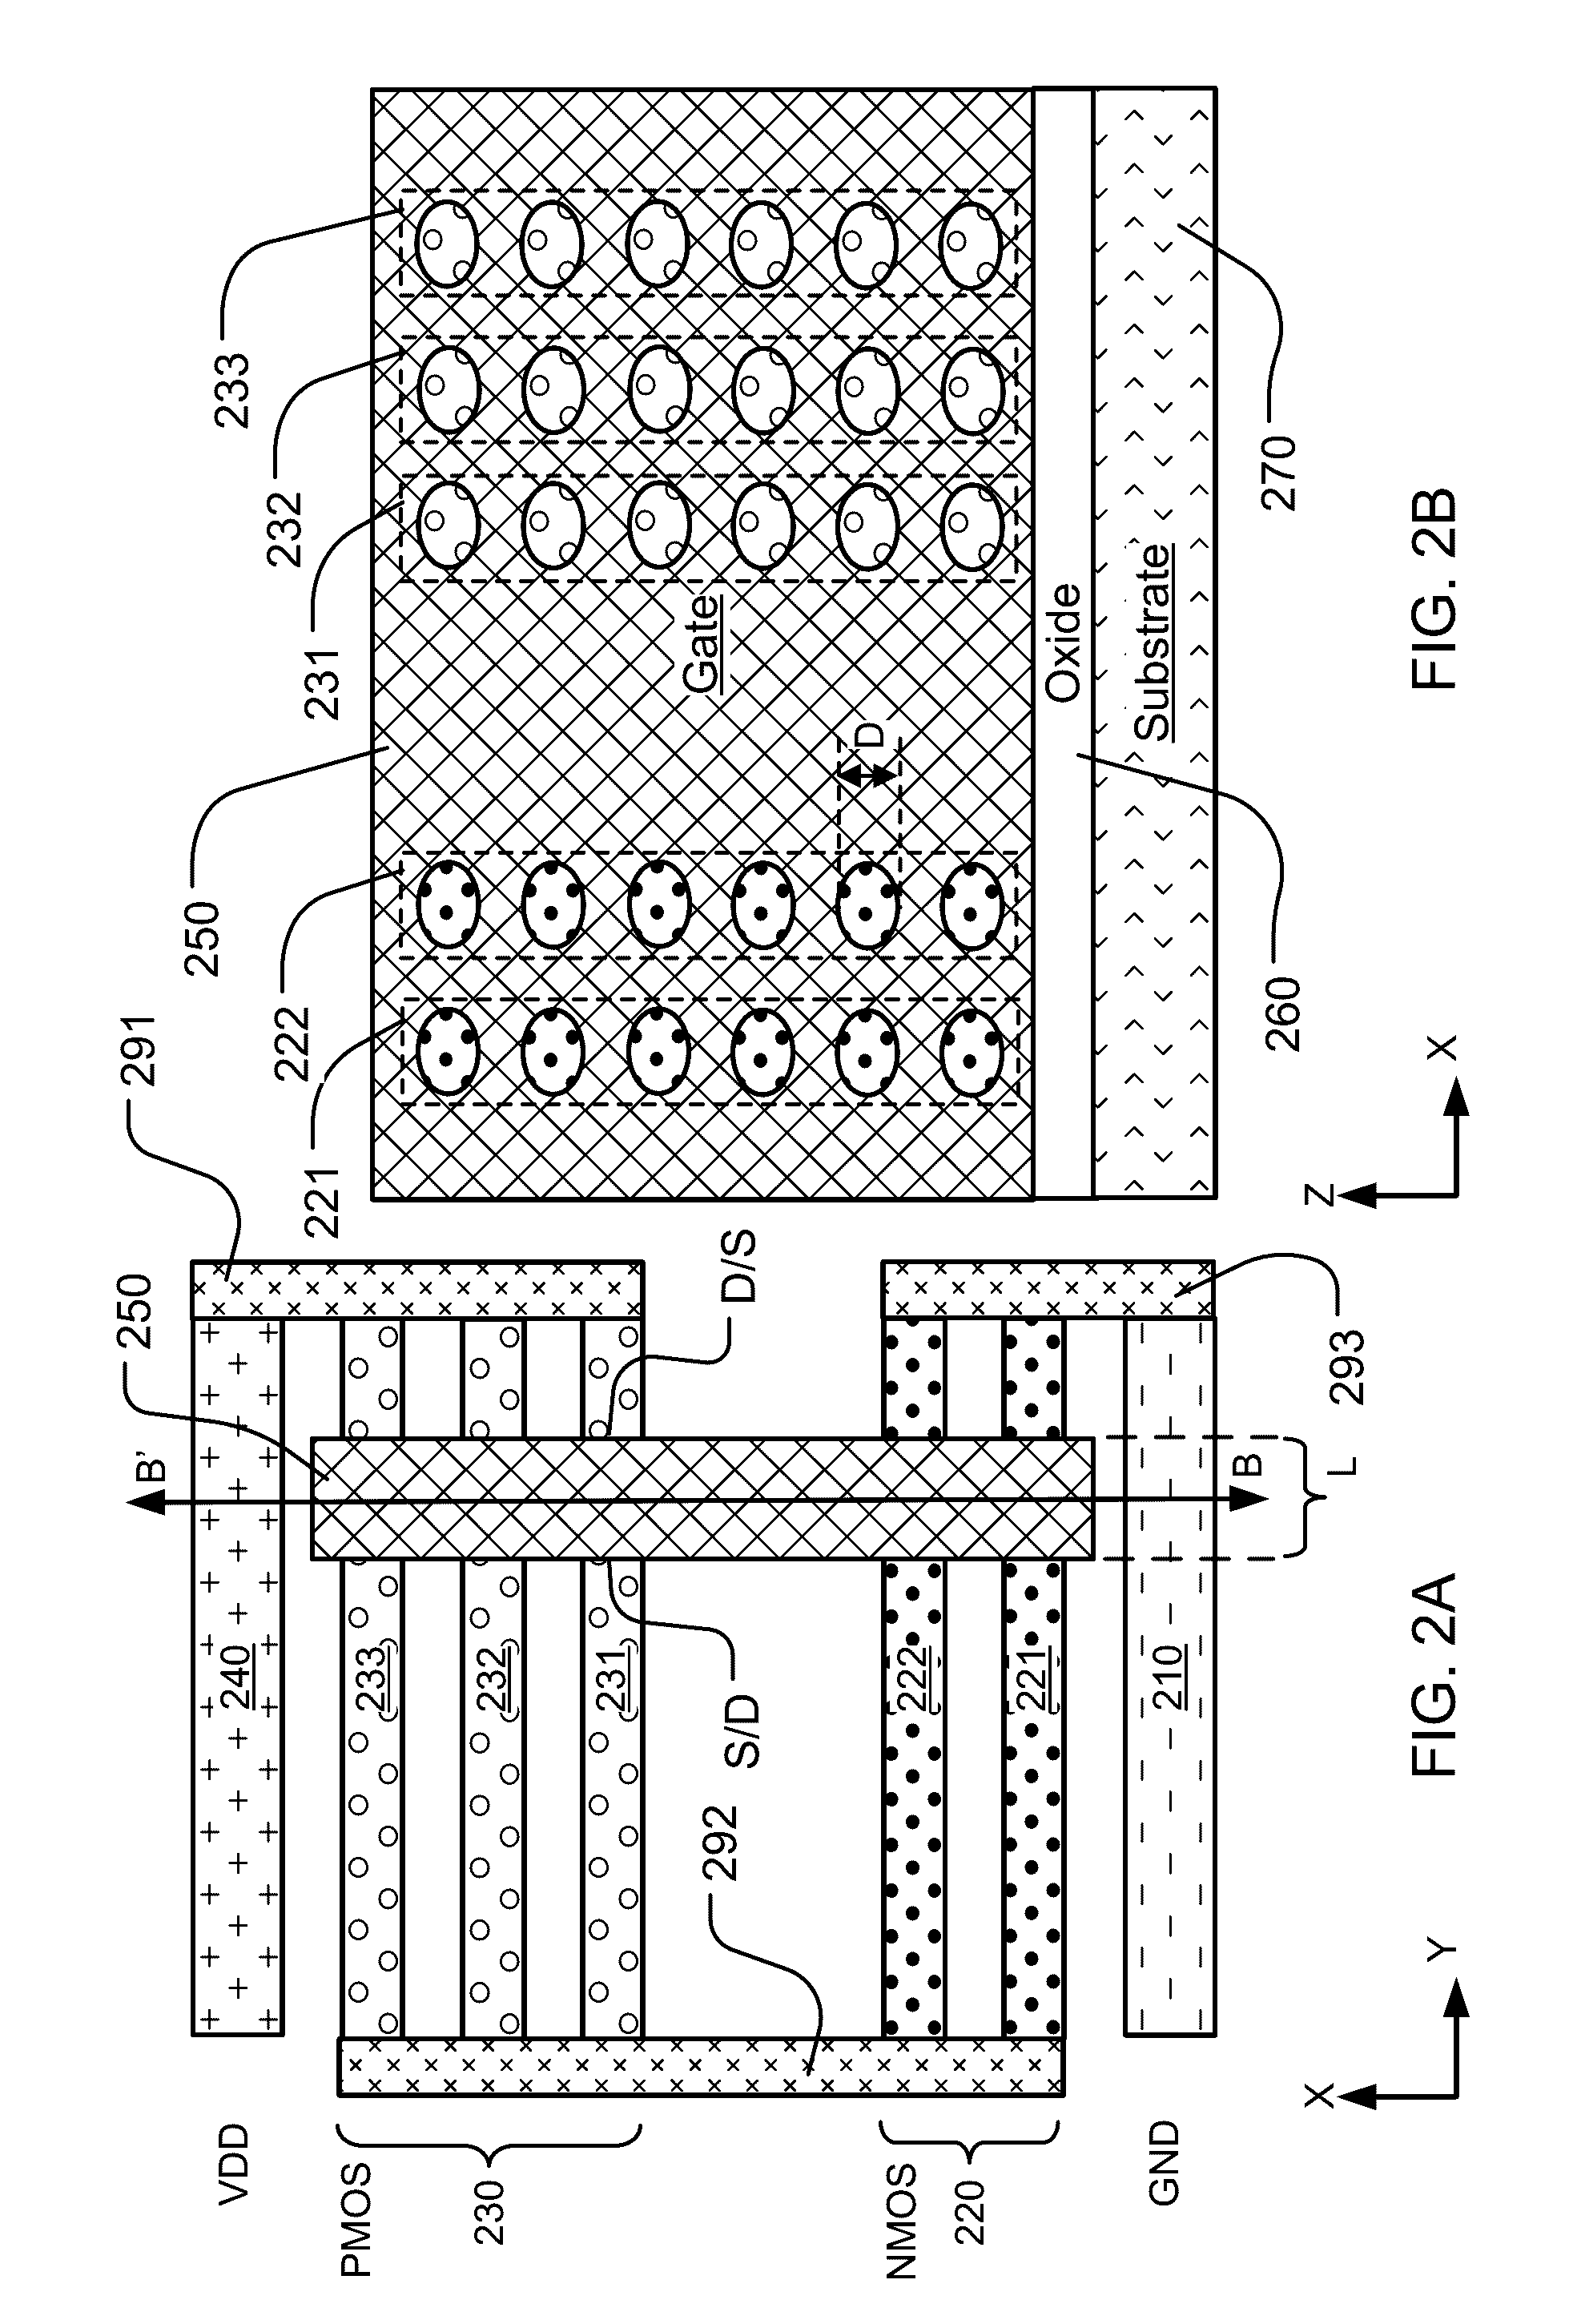 Design Tools For Converting a FinFet Circuit into a Circuit Including Nanowires and 2D Material Strips